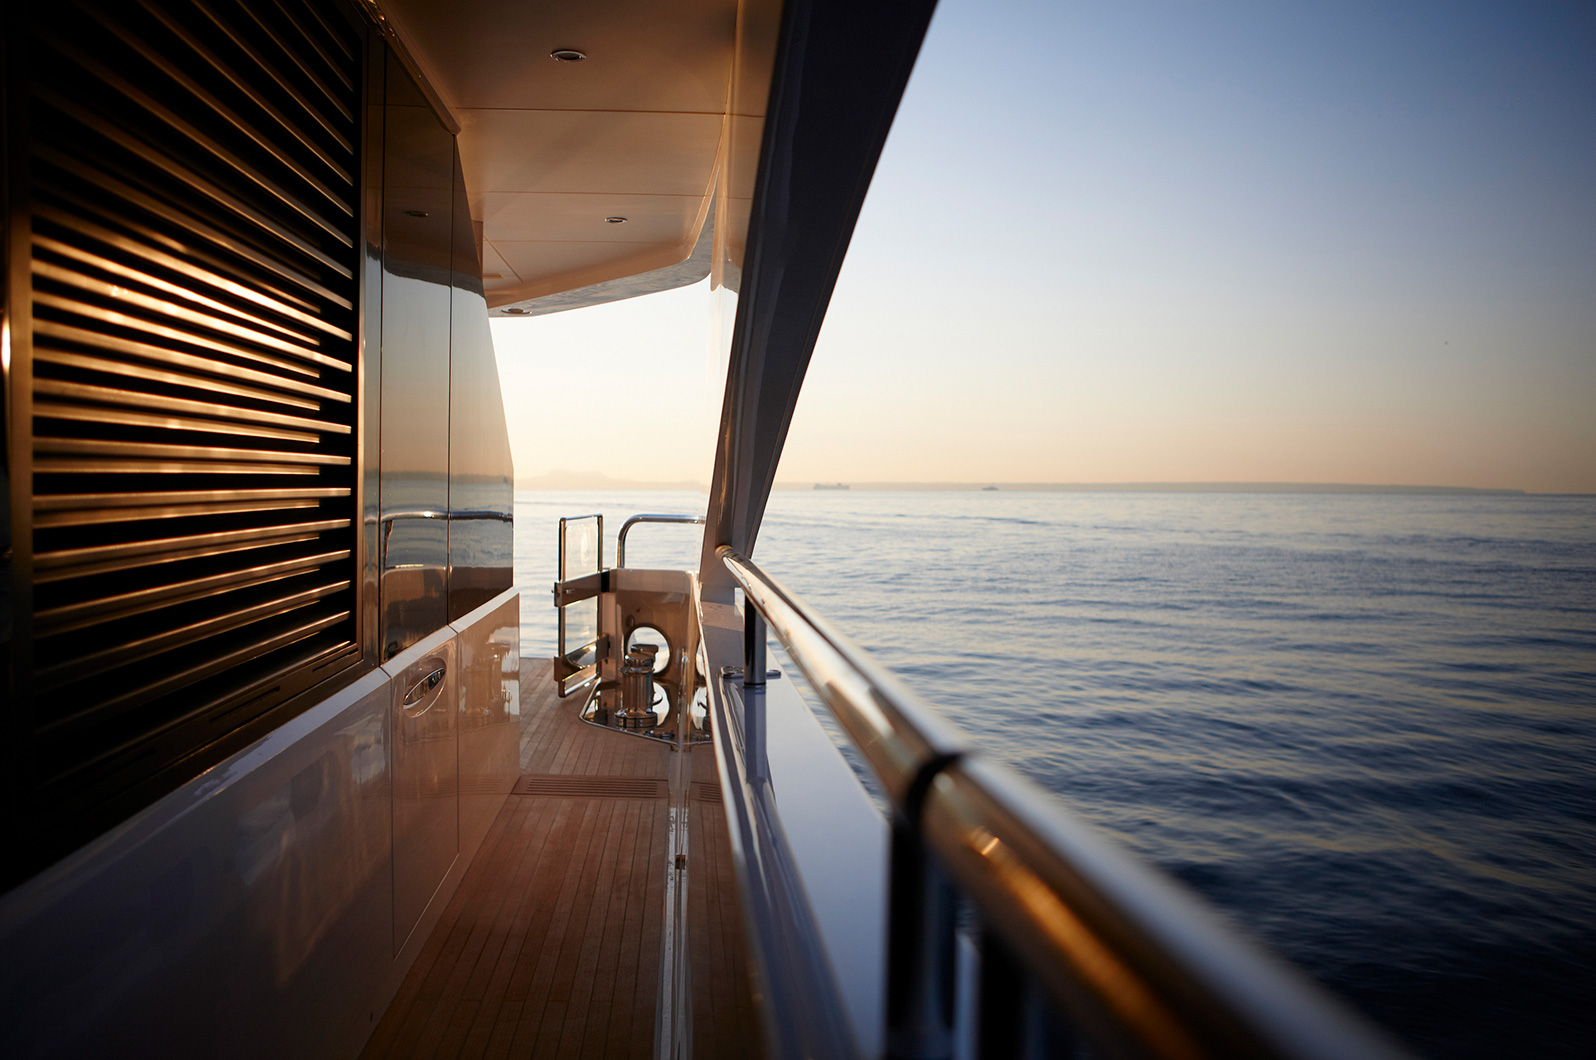 Part of a series of detail images to convey the quality of the boat. Shot on location in Palma.